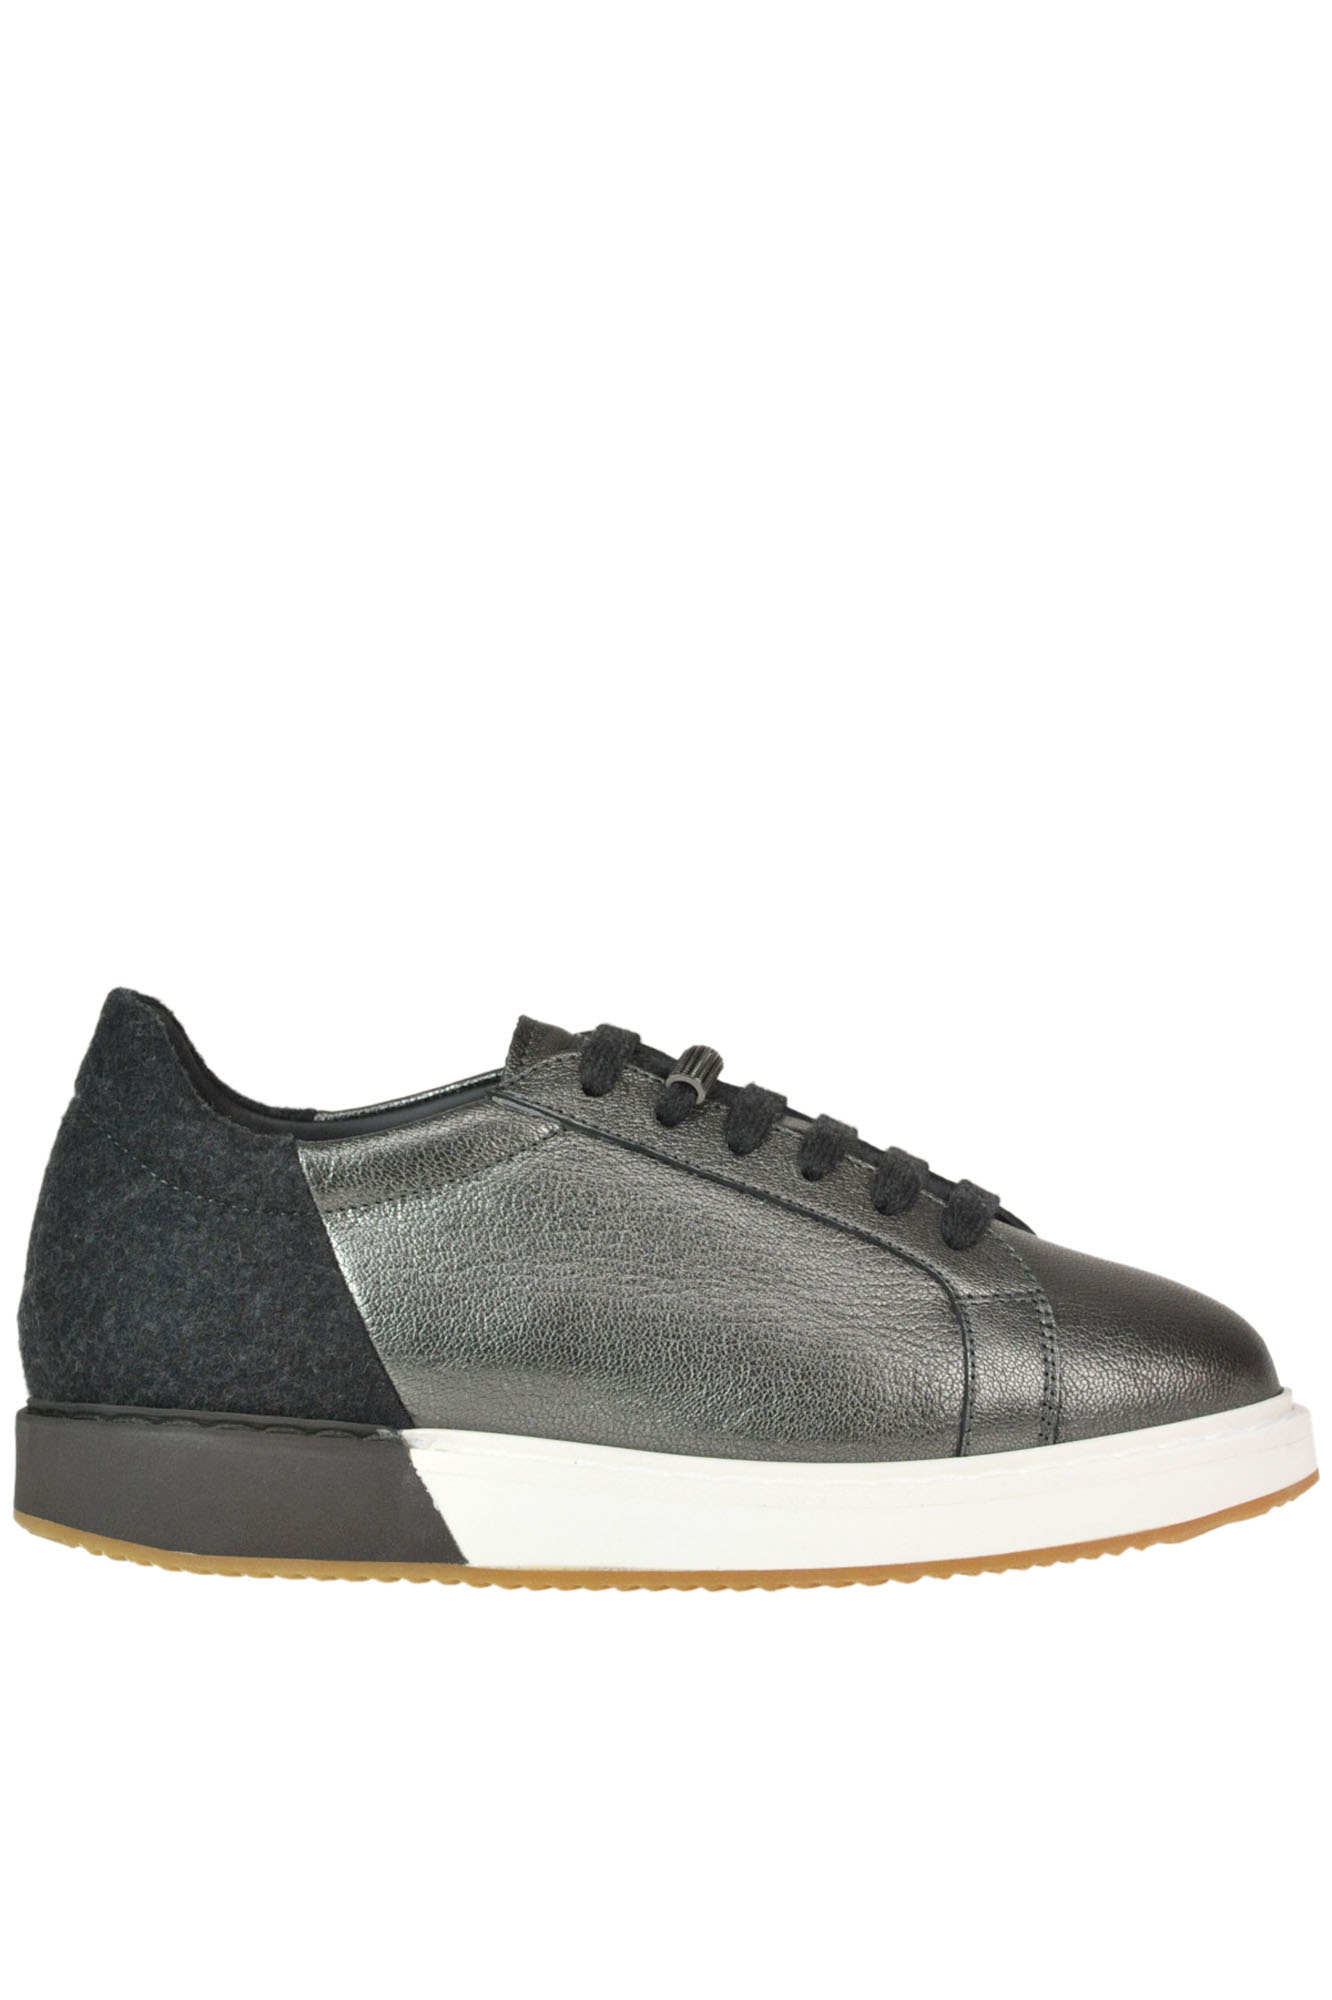 Brunello Cucinelli Metallic Efftect Leather Sneakers In Charcoal